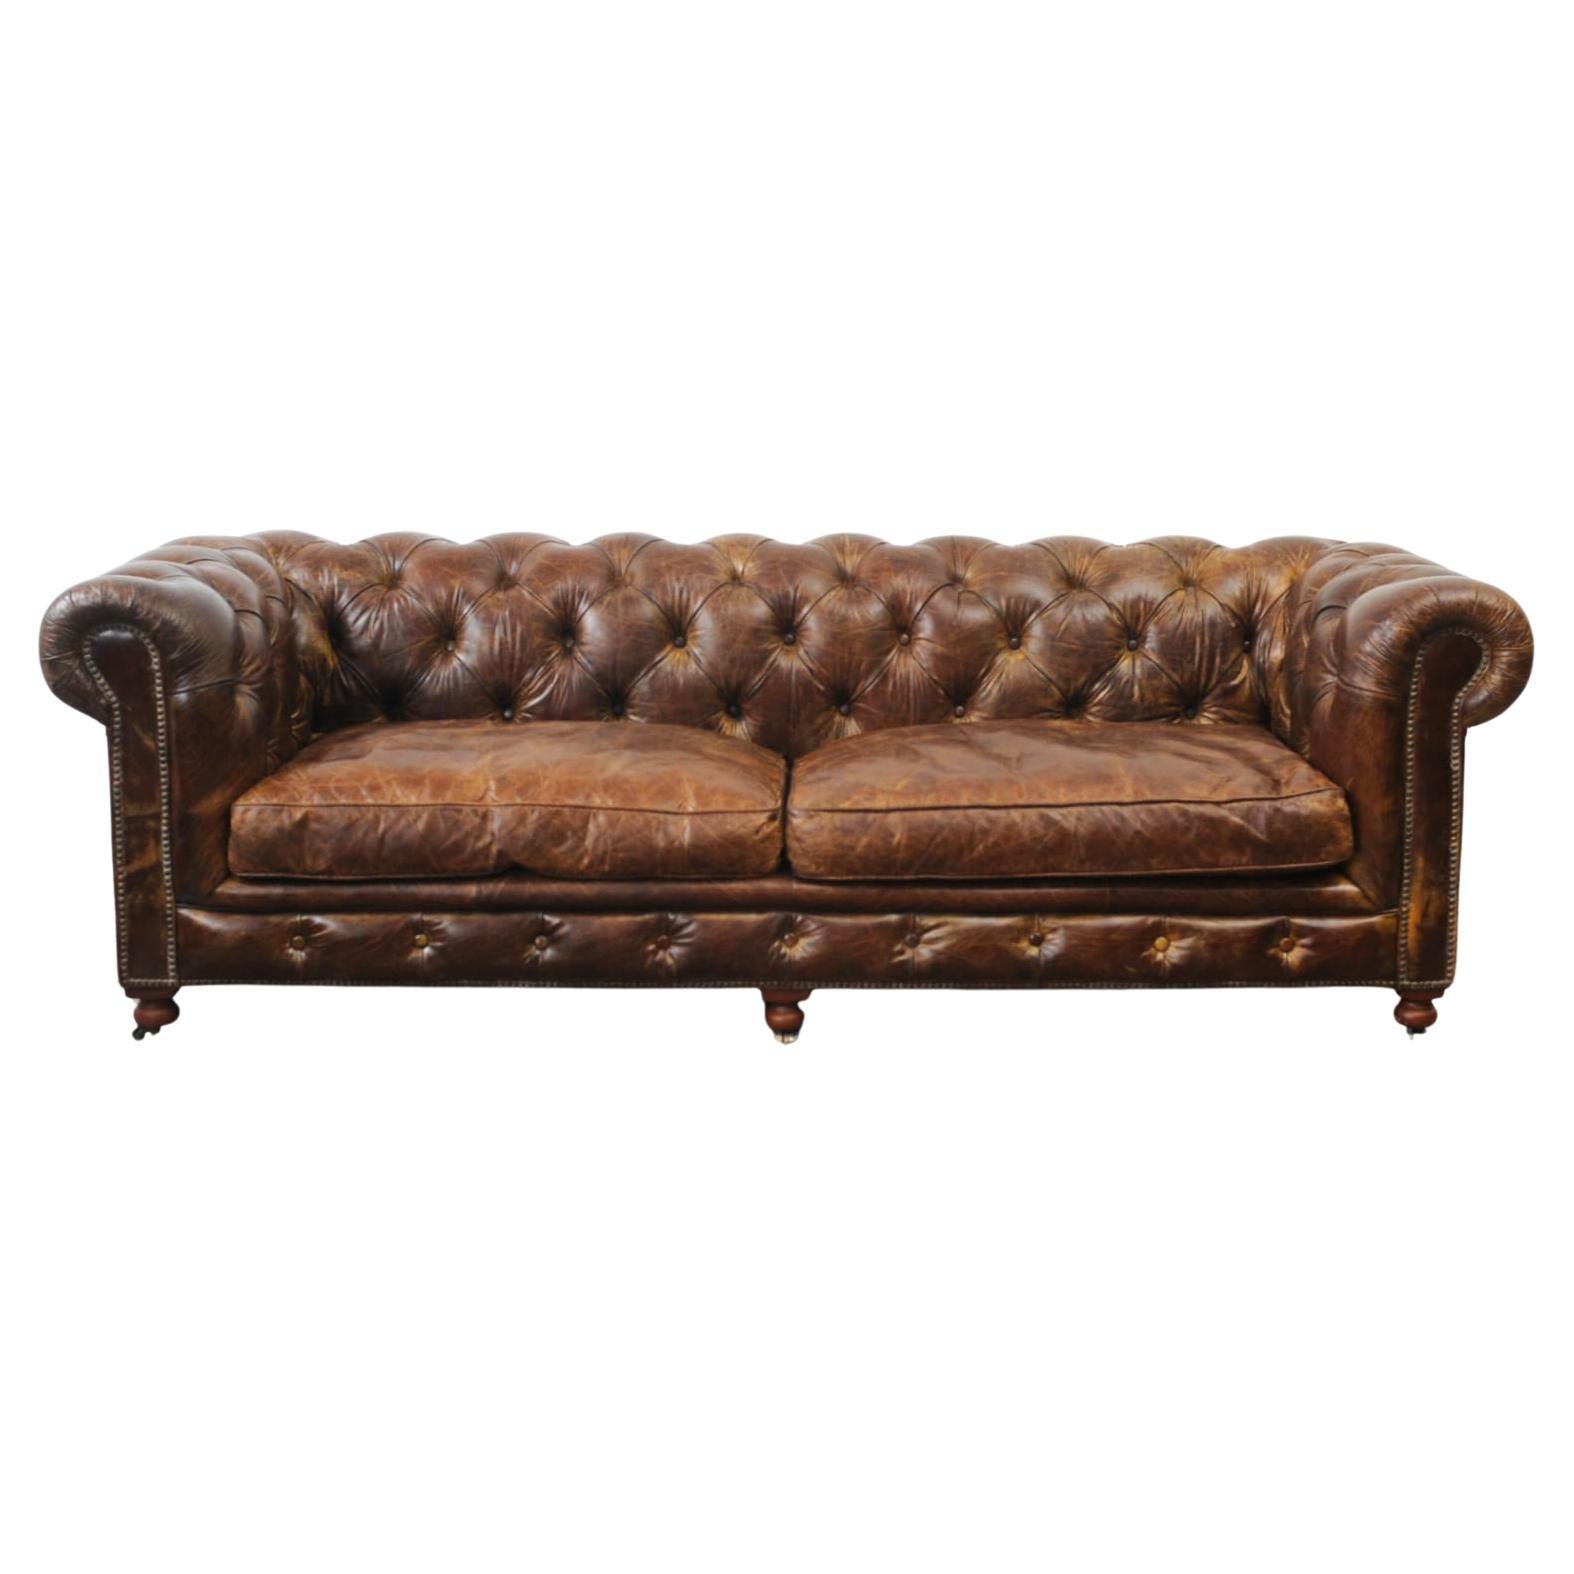 Large 4-seater Aged Leather Chester Sofa For Sale